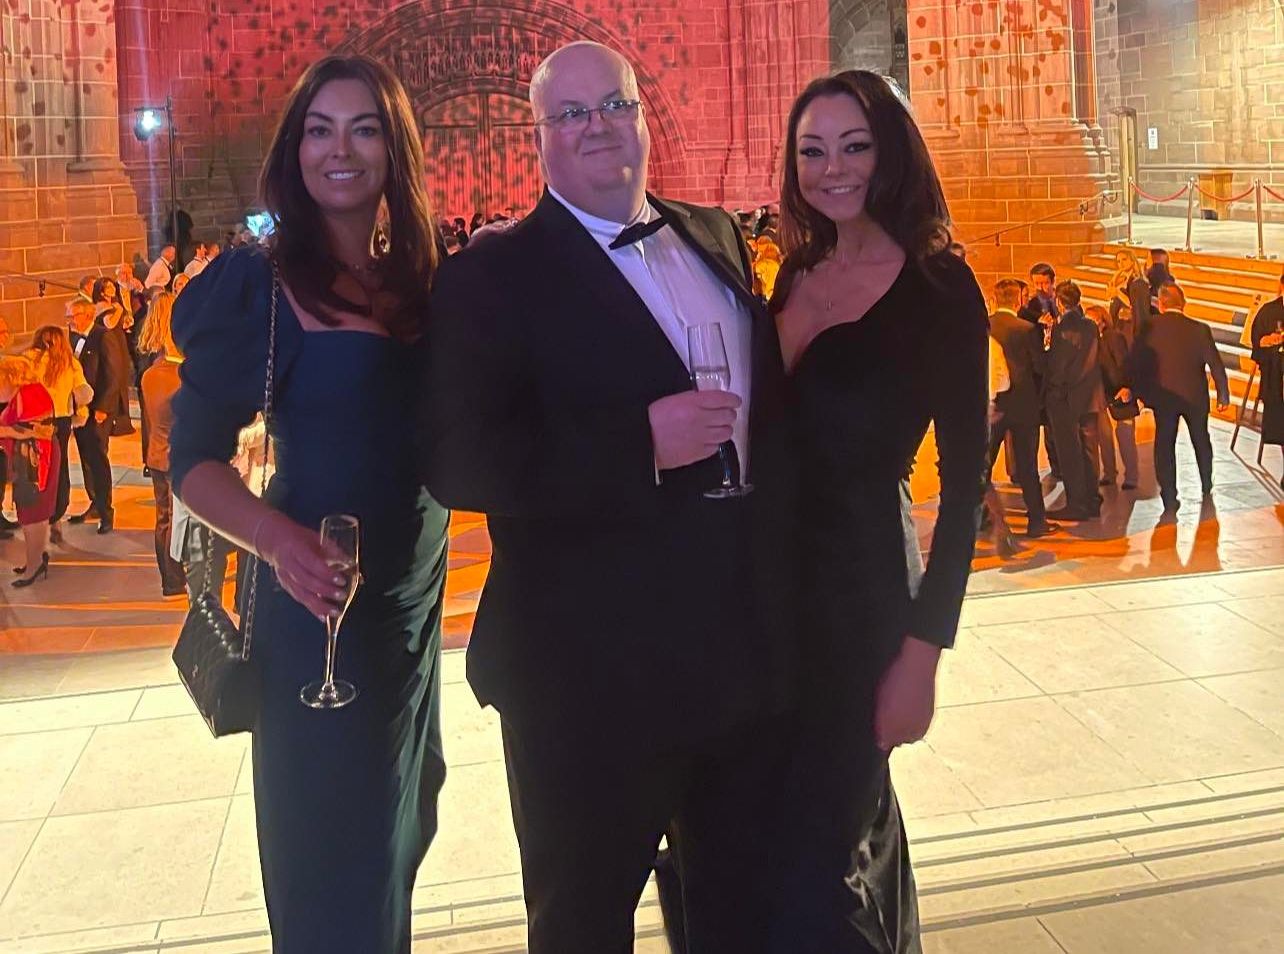 Silcock Leisure Group was honoured at the 2023 Liverpool City Region Tourims Awards for their historic Carousel. Pictured are Serena Silcock-Prince, Justin Prescott and Taryn Marissa Dodd